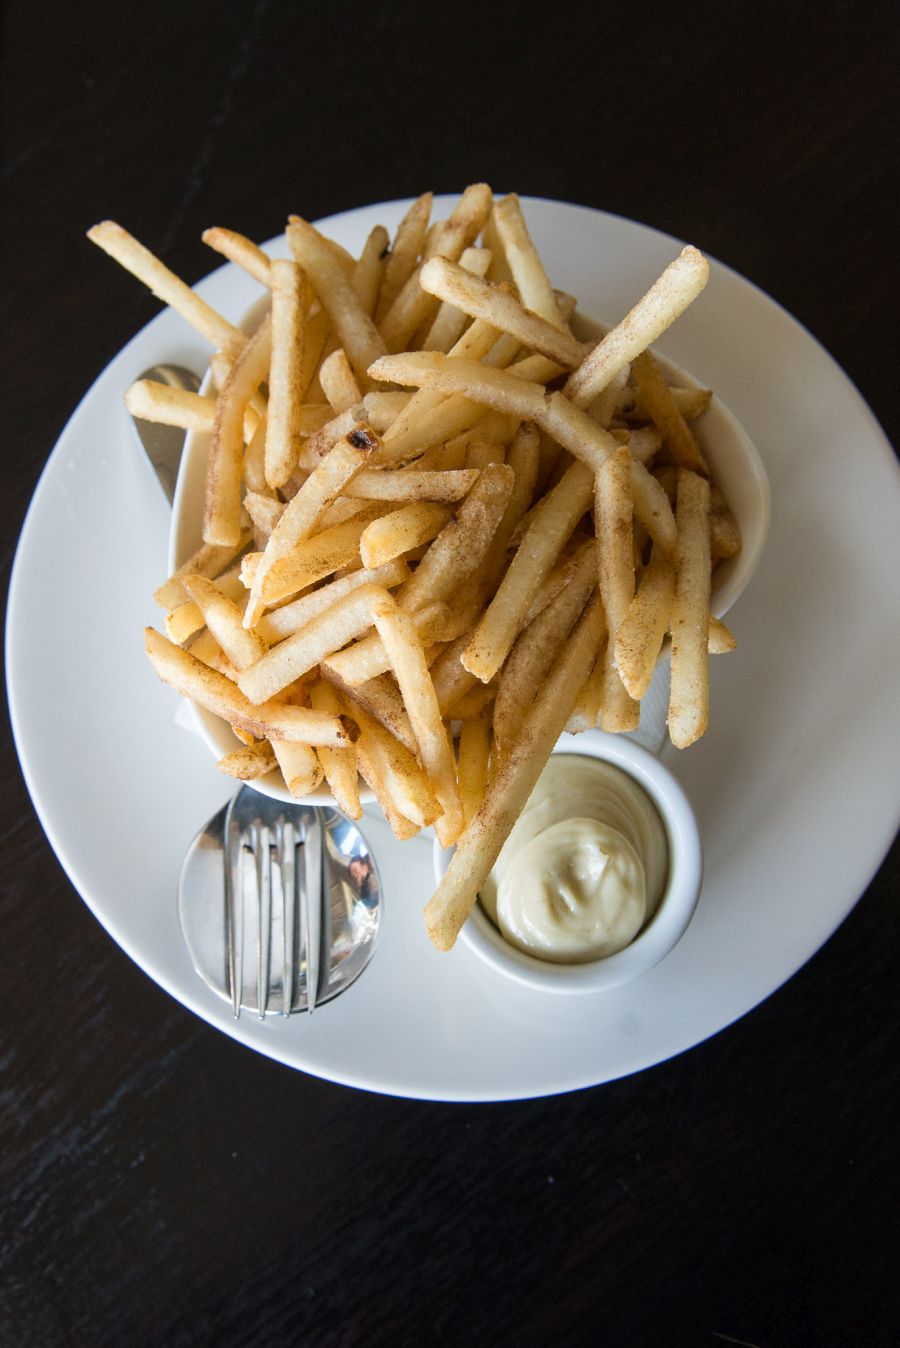 Porcini dusted shoestring fries with blue cheese mayo (NZ$7)